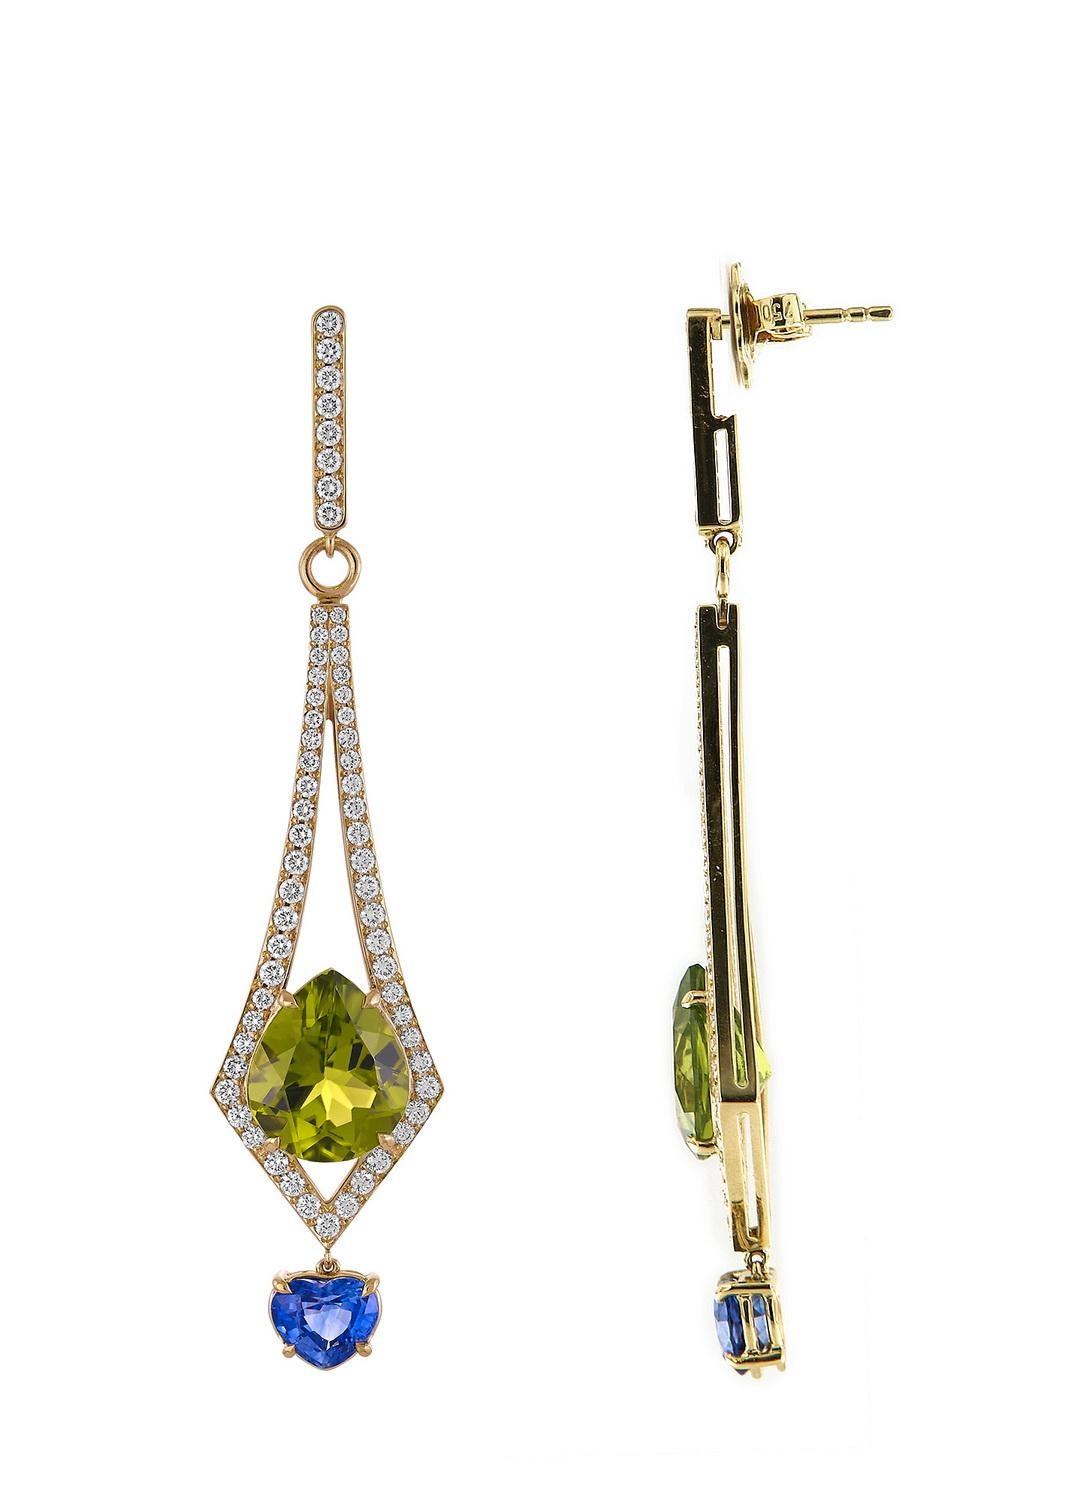 Modern 8.57 Carat Peridot and 2.26 Carat Blue Sapphire and Diamond Earrings in 18K Gold